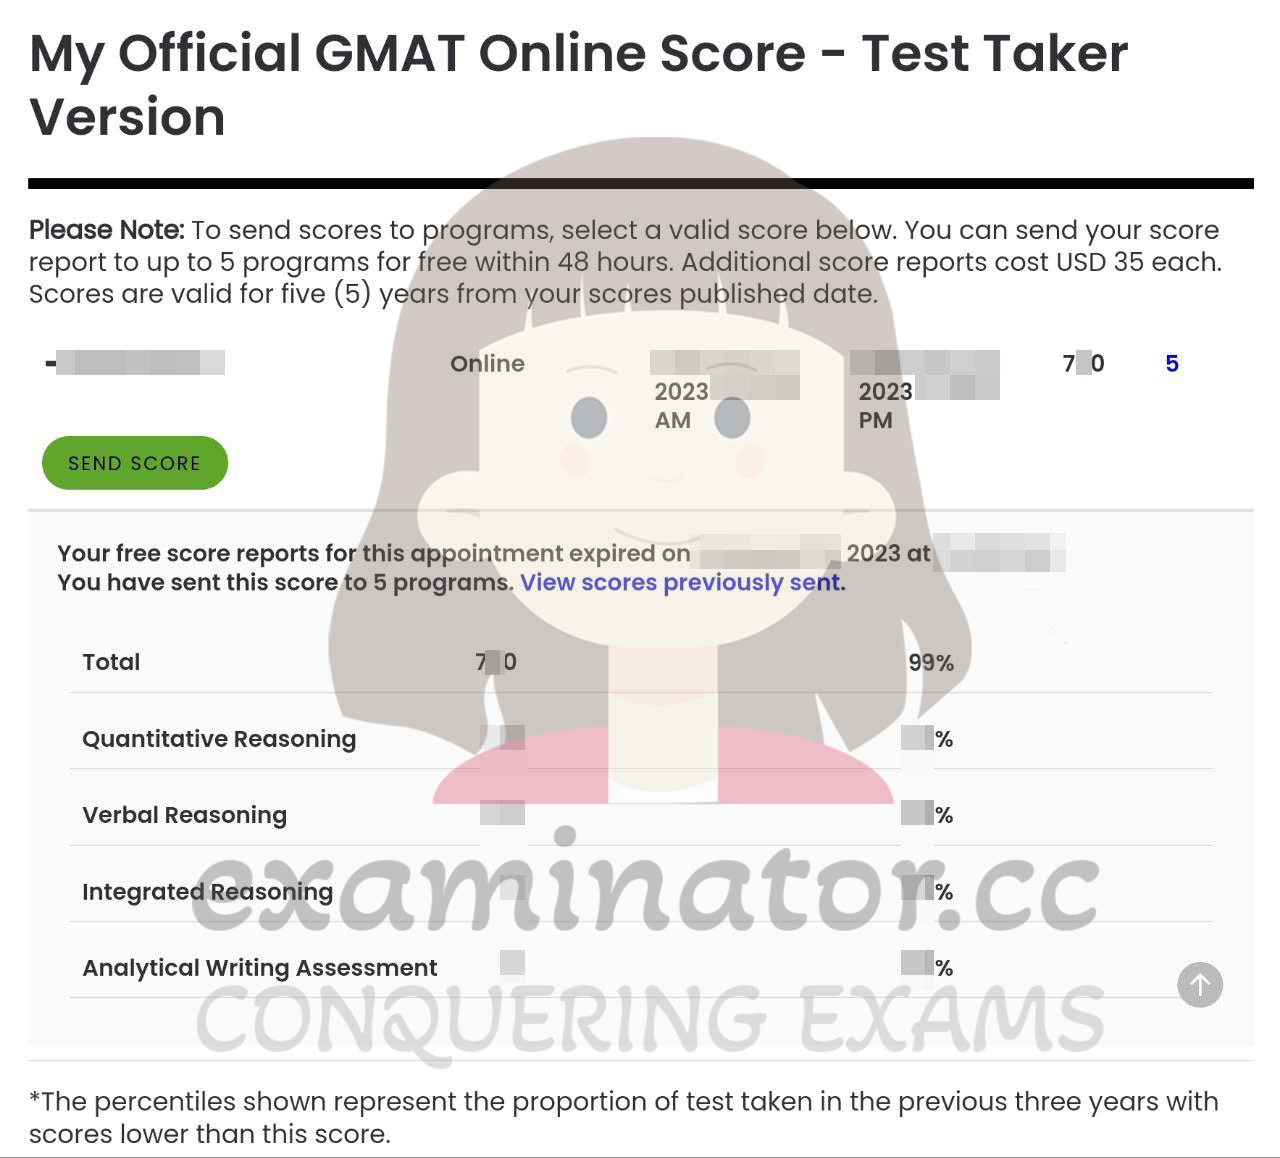 🇰🇼From Kuwait to GMAT Glory: Client Achieves an Official Score of 770+ with Our GMAT Cheating Expert Assistance! 🌠